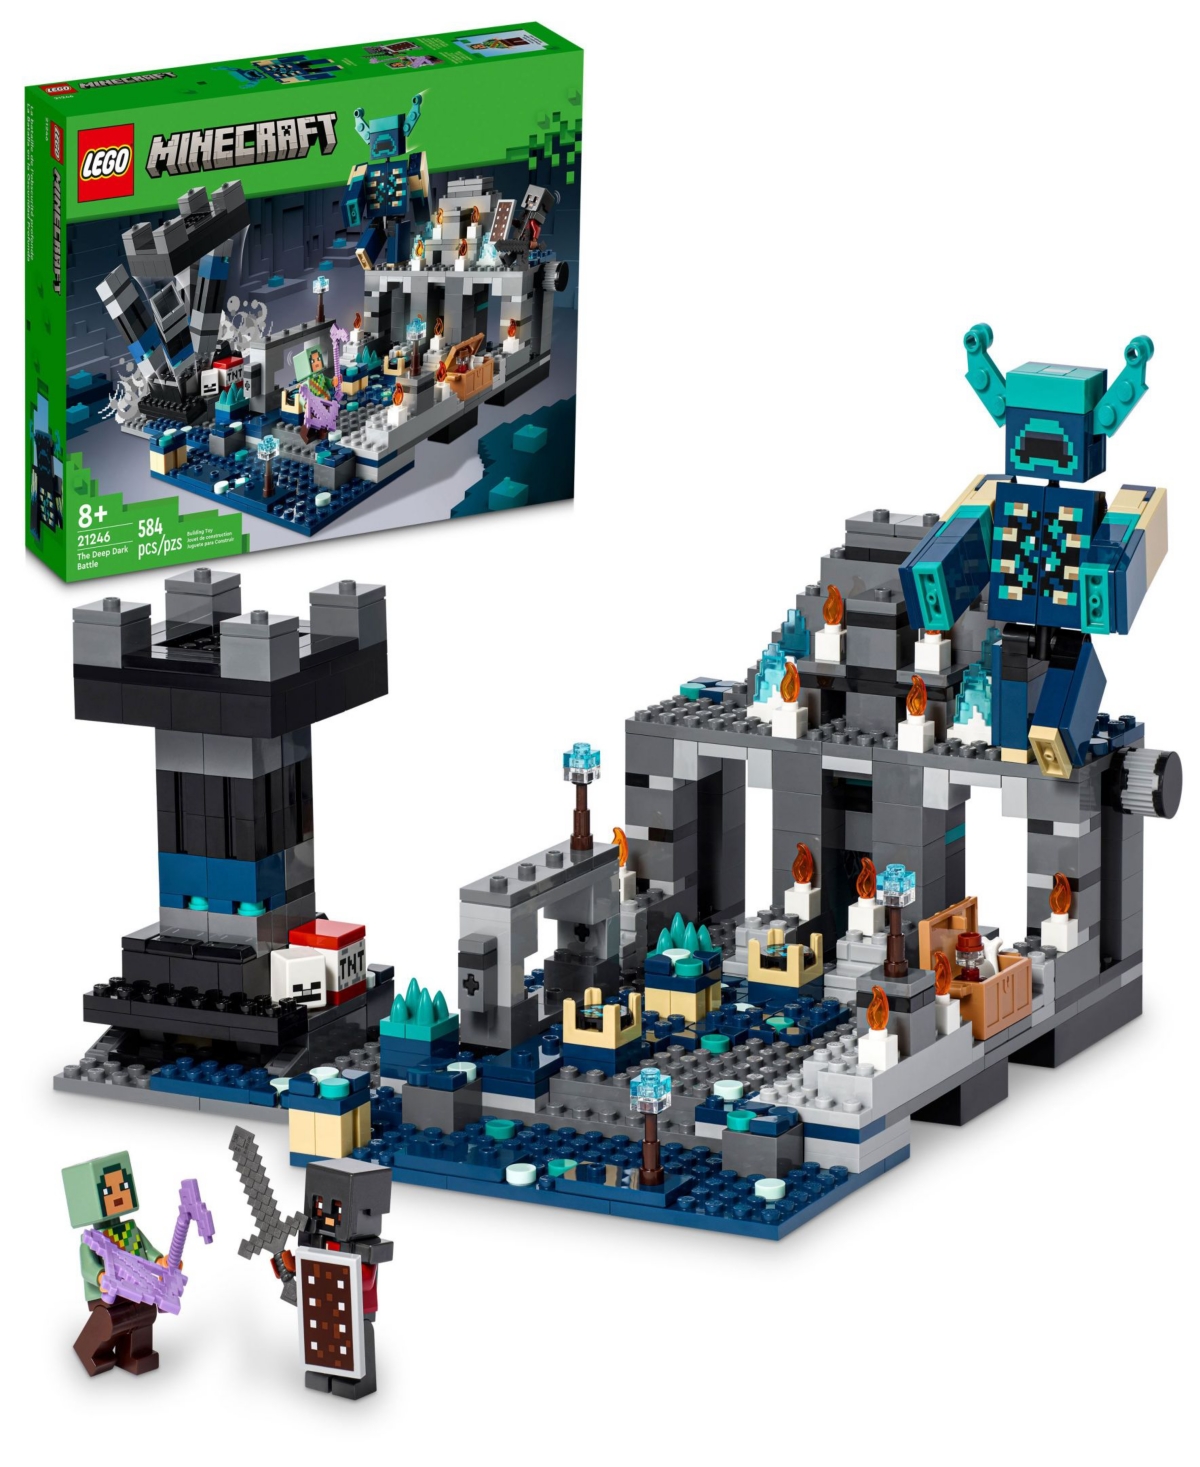 Lego Minecraft The Deep Dark Battle 21246 Toy Building Set With Elven Arbalest Knight And Dwarven Netheri In Multicolor